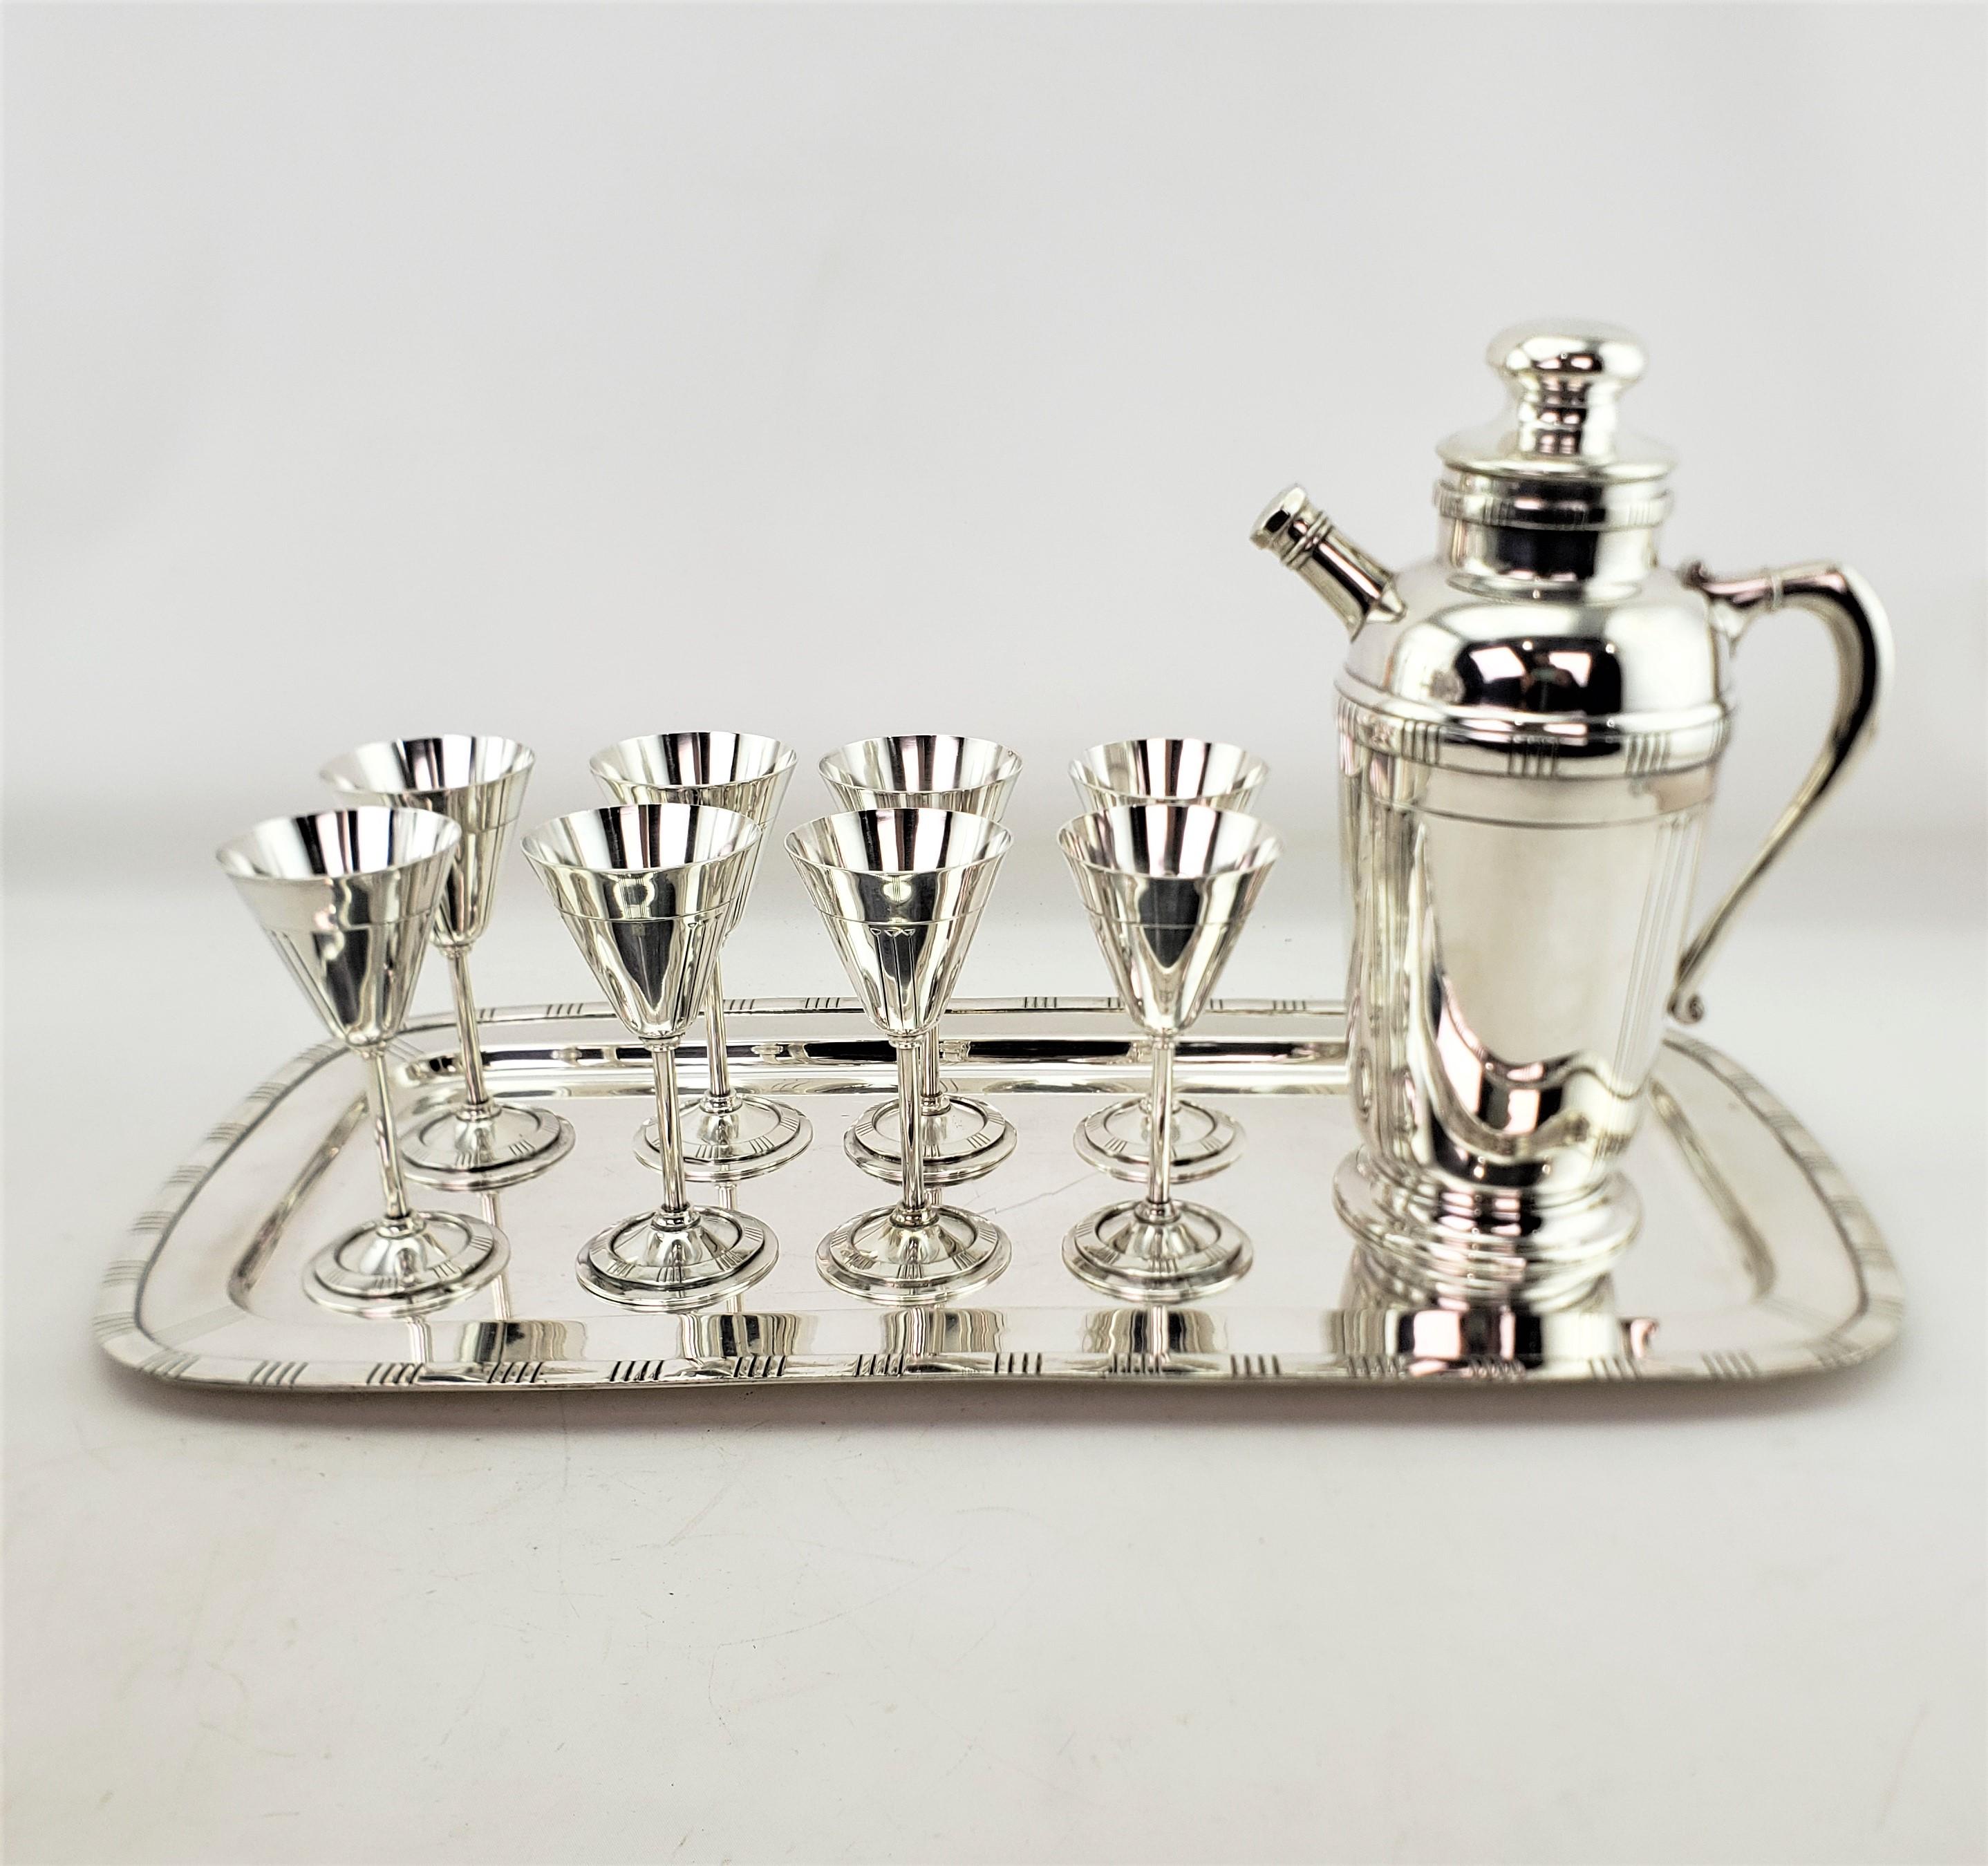 Art Deco Midcentury Silver Plated Cocktail Set with Tray, Glasses & Shaker Pitcher For Sale